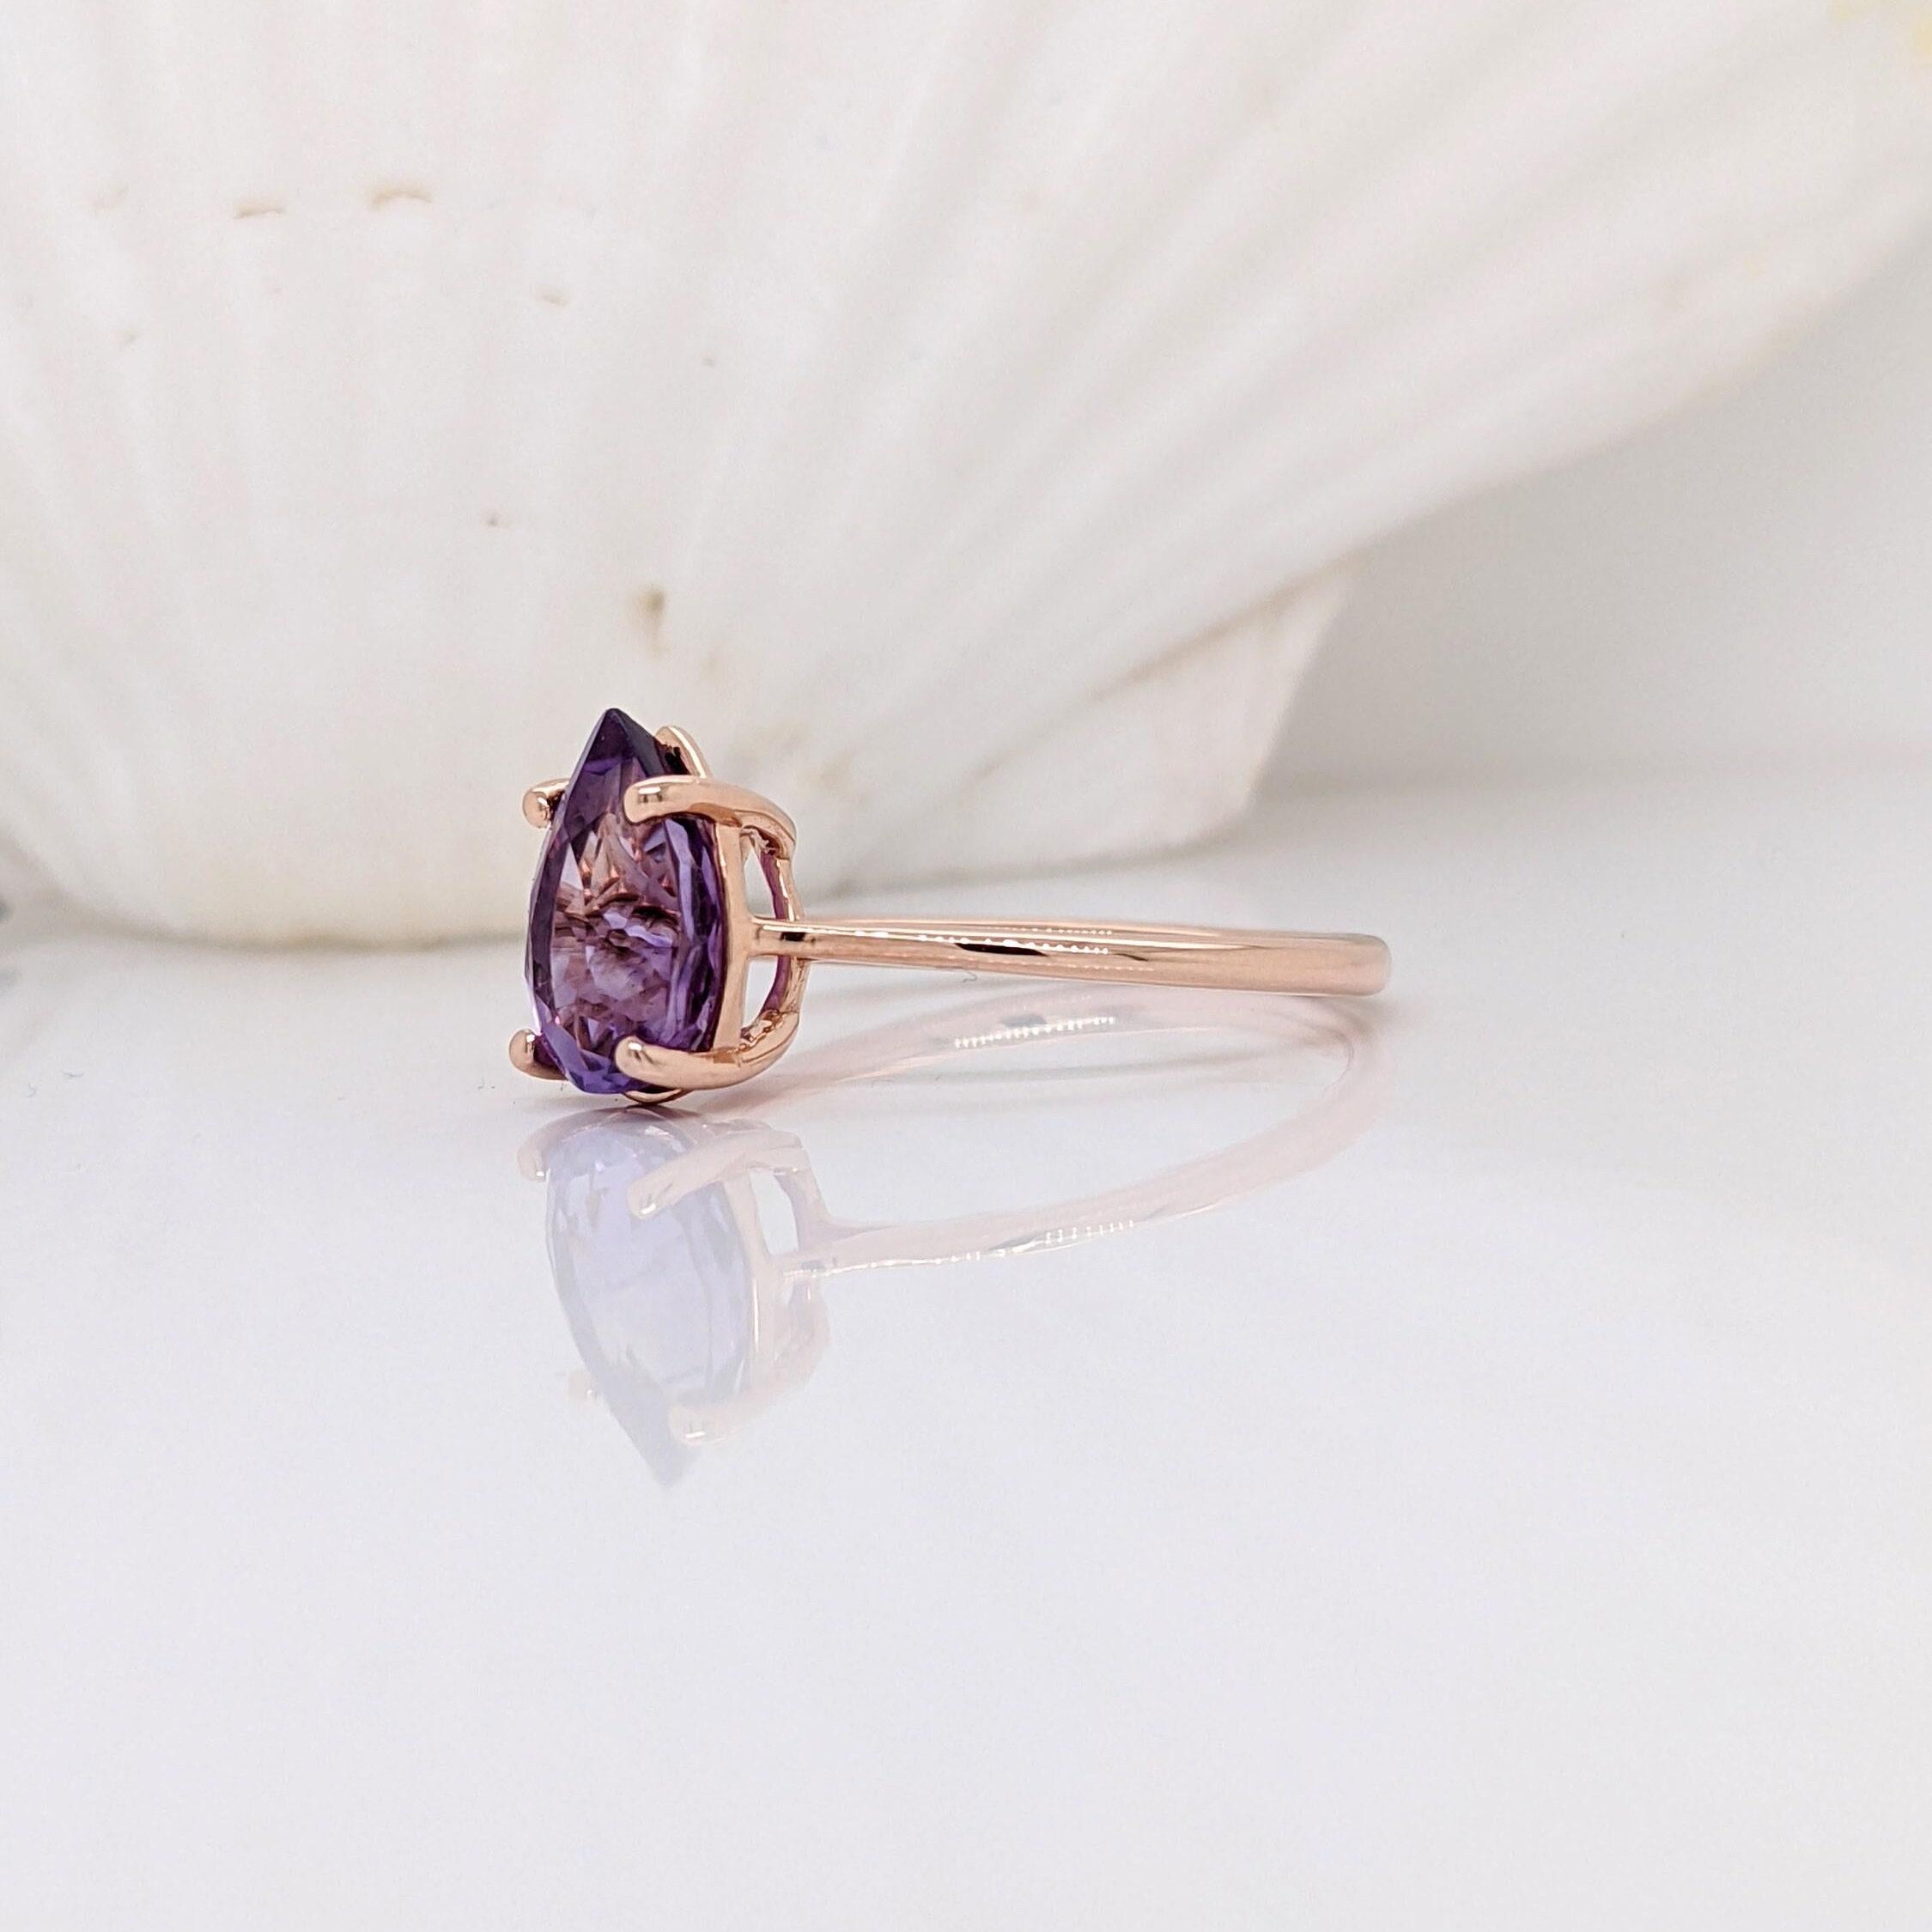 Specifications:

Item type: Ring
Center stone: Amethyst
Treatment: Heated
Weight: 2.10 ct
Head size: 10x7mm
Shape: Pear
Hardness: 7
Origin: Zambia

Metal: 14k/2.05g

SKU: AJR472/829

This setting is currently priced with Solid 14k Gold.

If you